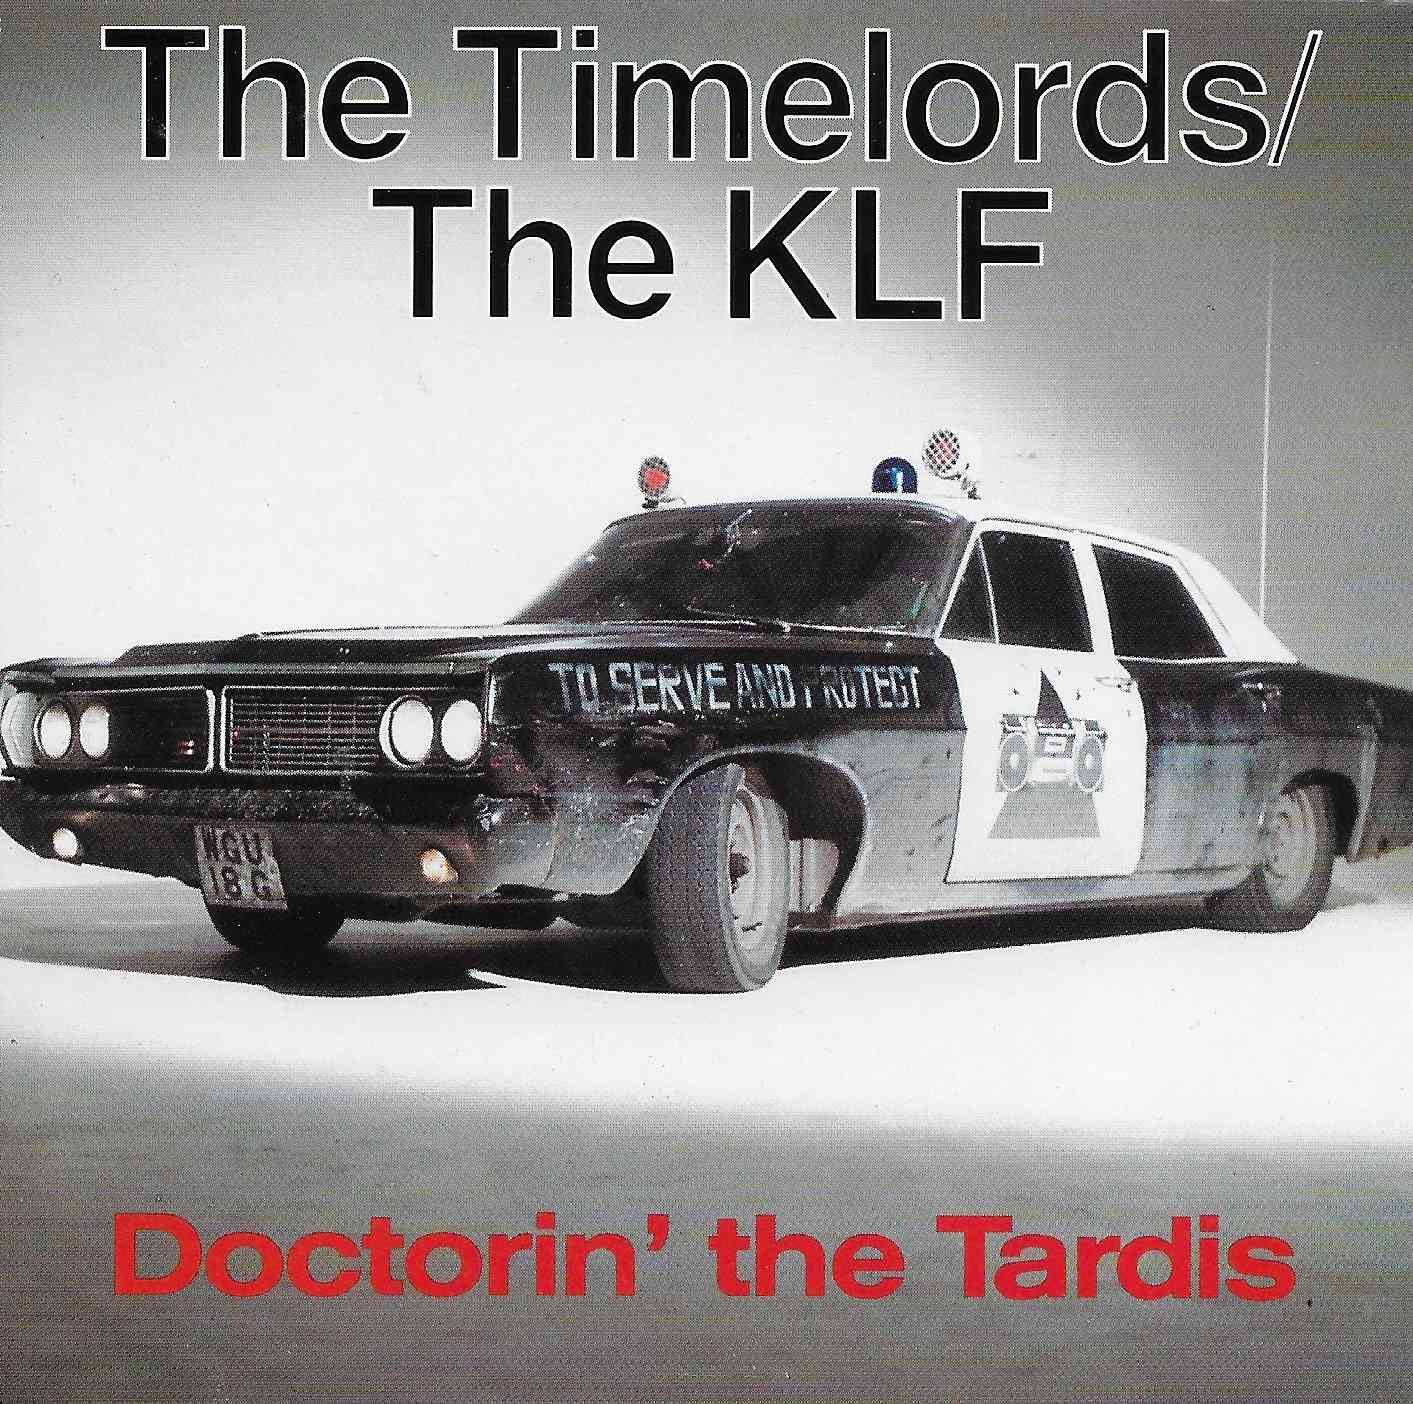 Picture of TVT 4025-2 Doctorin\' the Tardis by artist Ron Grainer / The Timelords / KLF from the BBC records and Tapes library